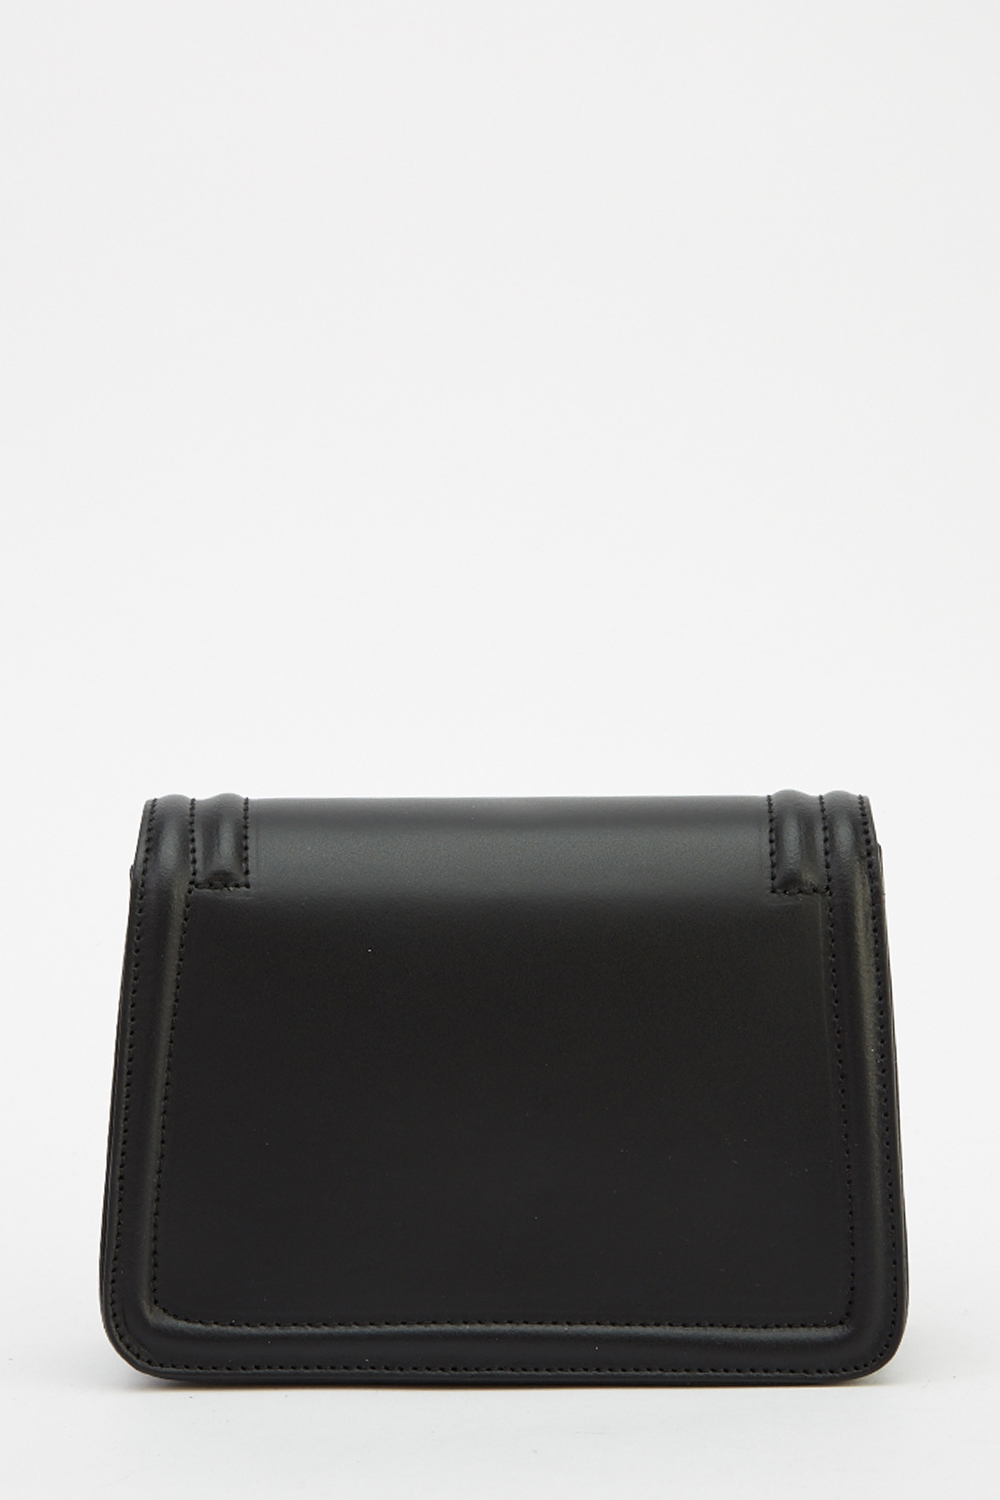 LYDC London Leather Small Shoulder Bag - Limited edition | Discount ...